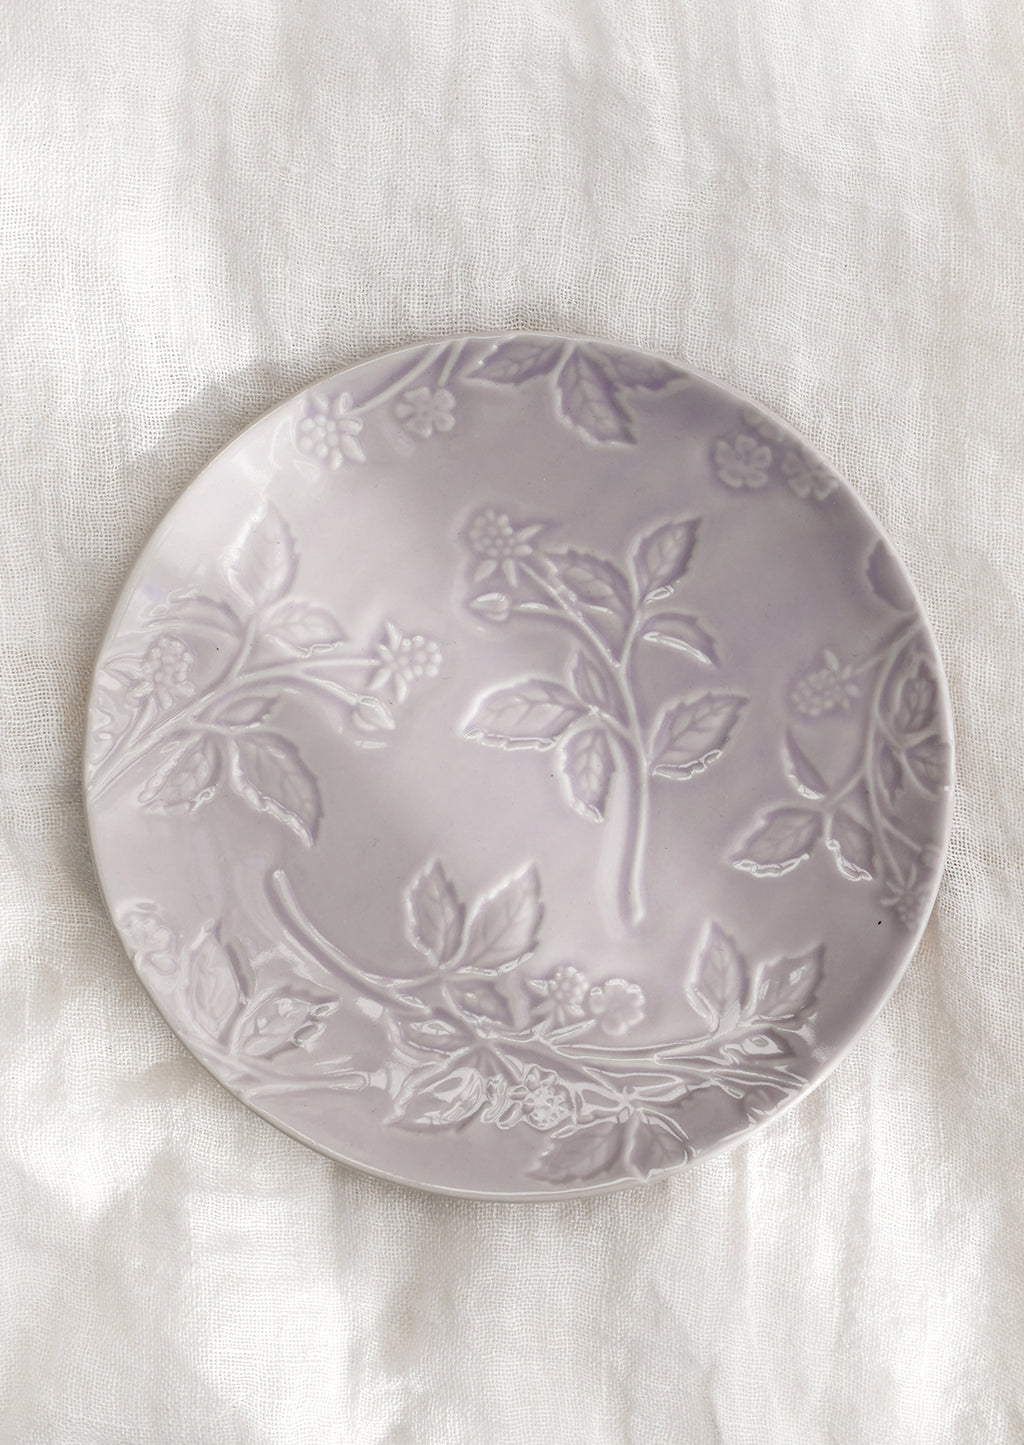 Pale Lavender: A round ceramic dessert plate in lavender with tonal raspberry pattern.